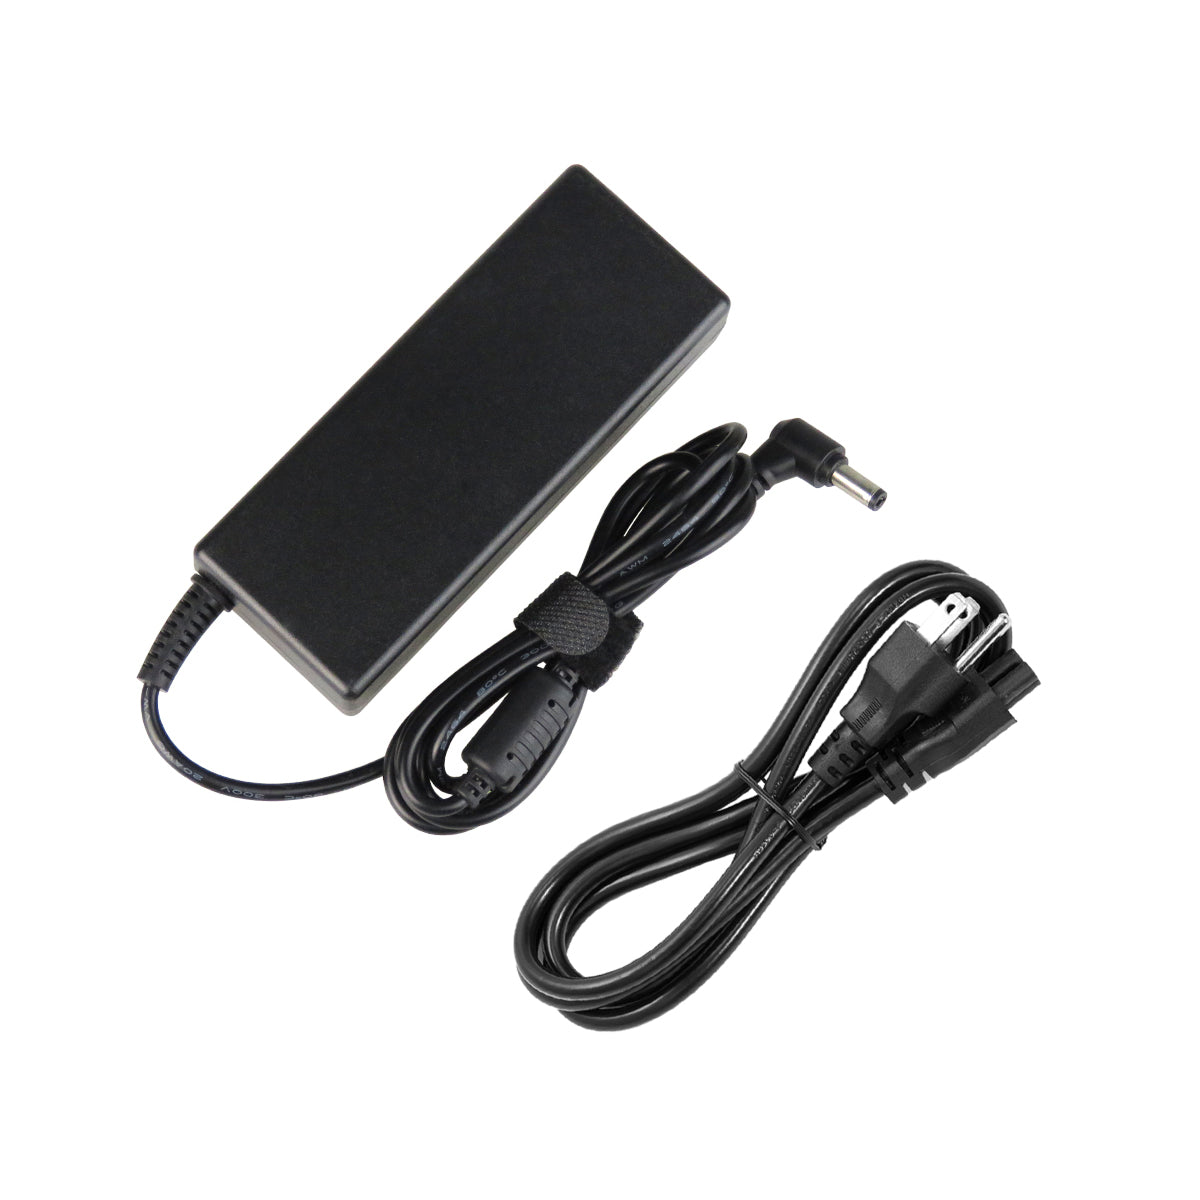 AC Adapter Charger for ASUS X55A-RBK4 Notebook.